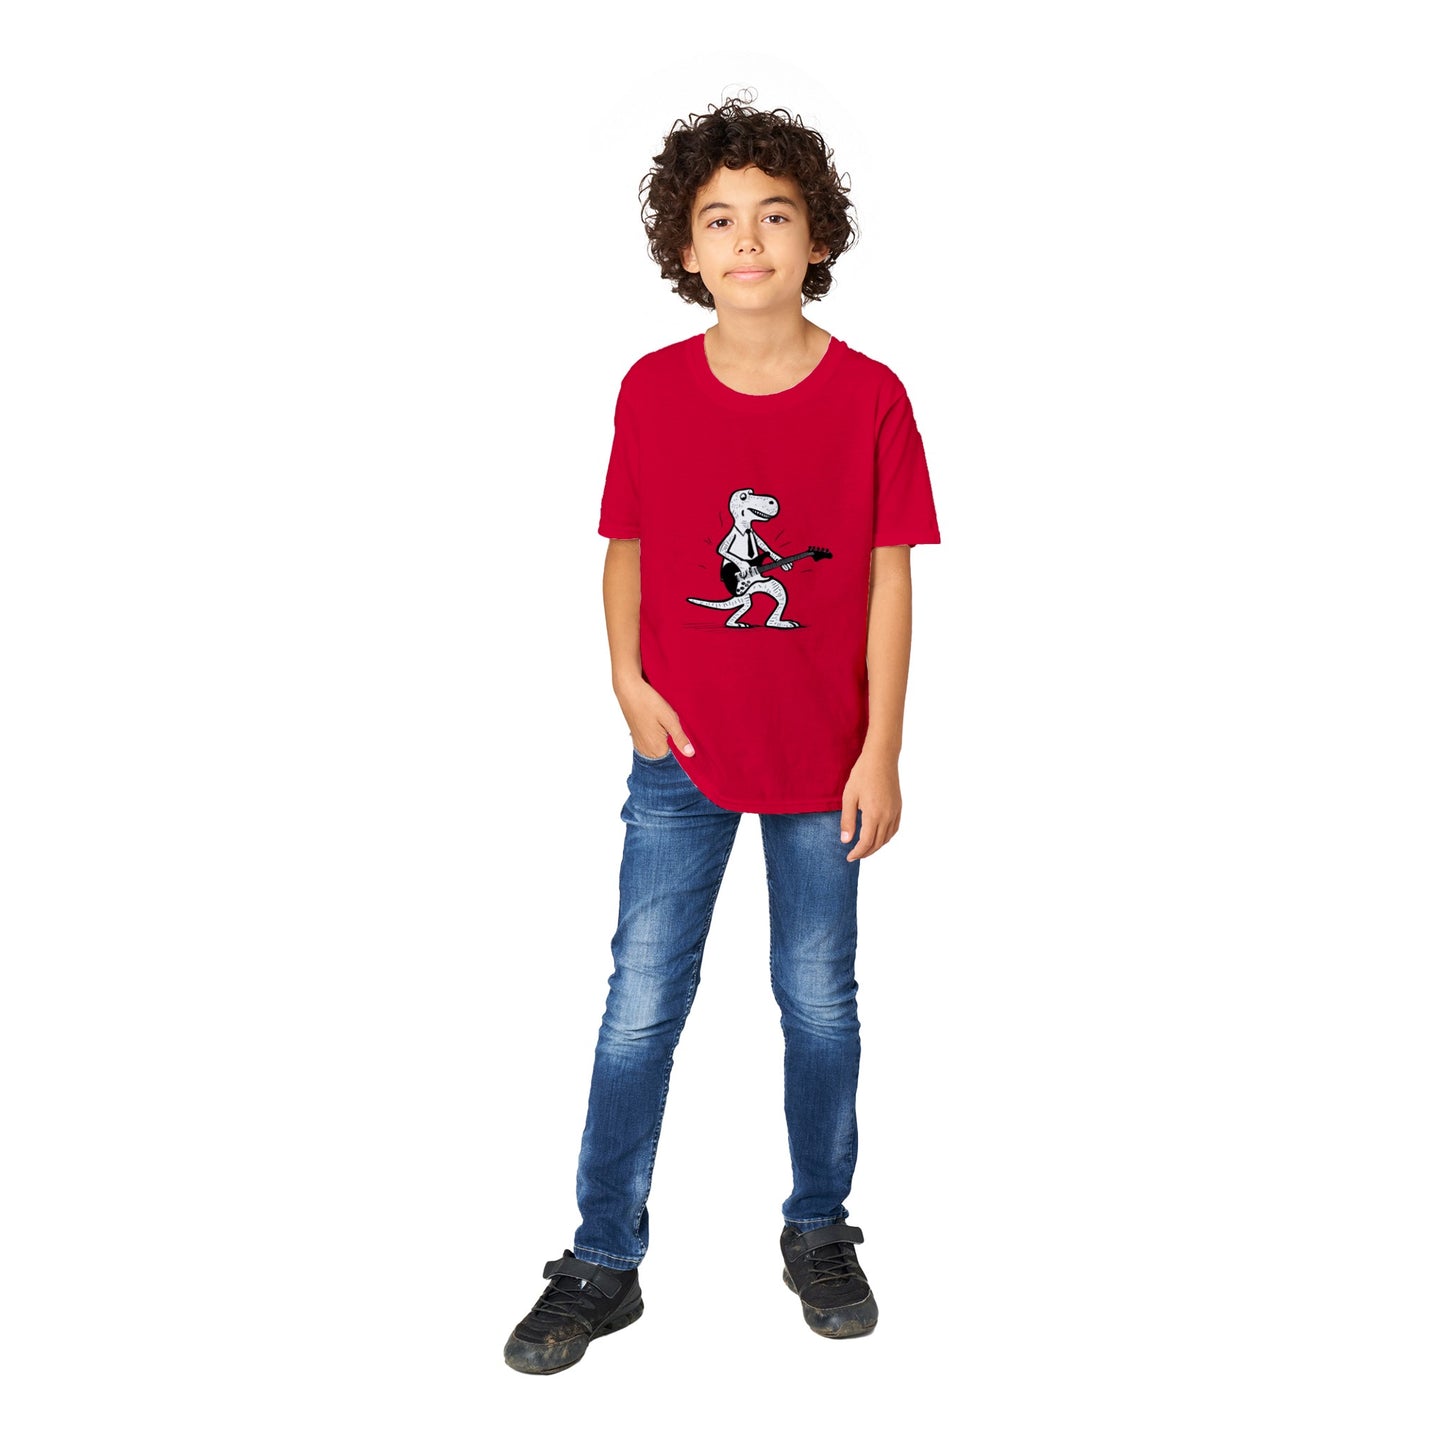 boy wearing a red t-shirt with a t-rex dinosaur wearing a tie playing the guitar print